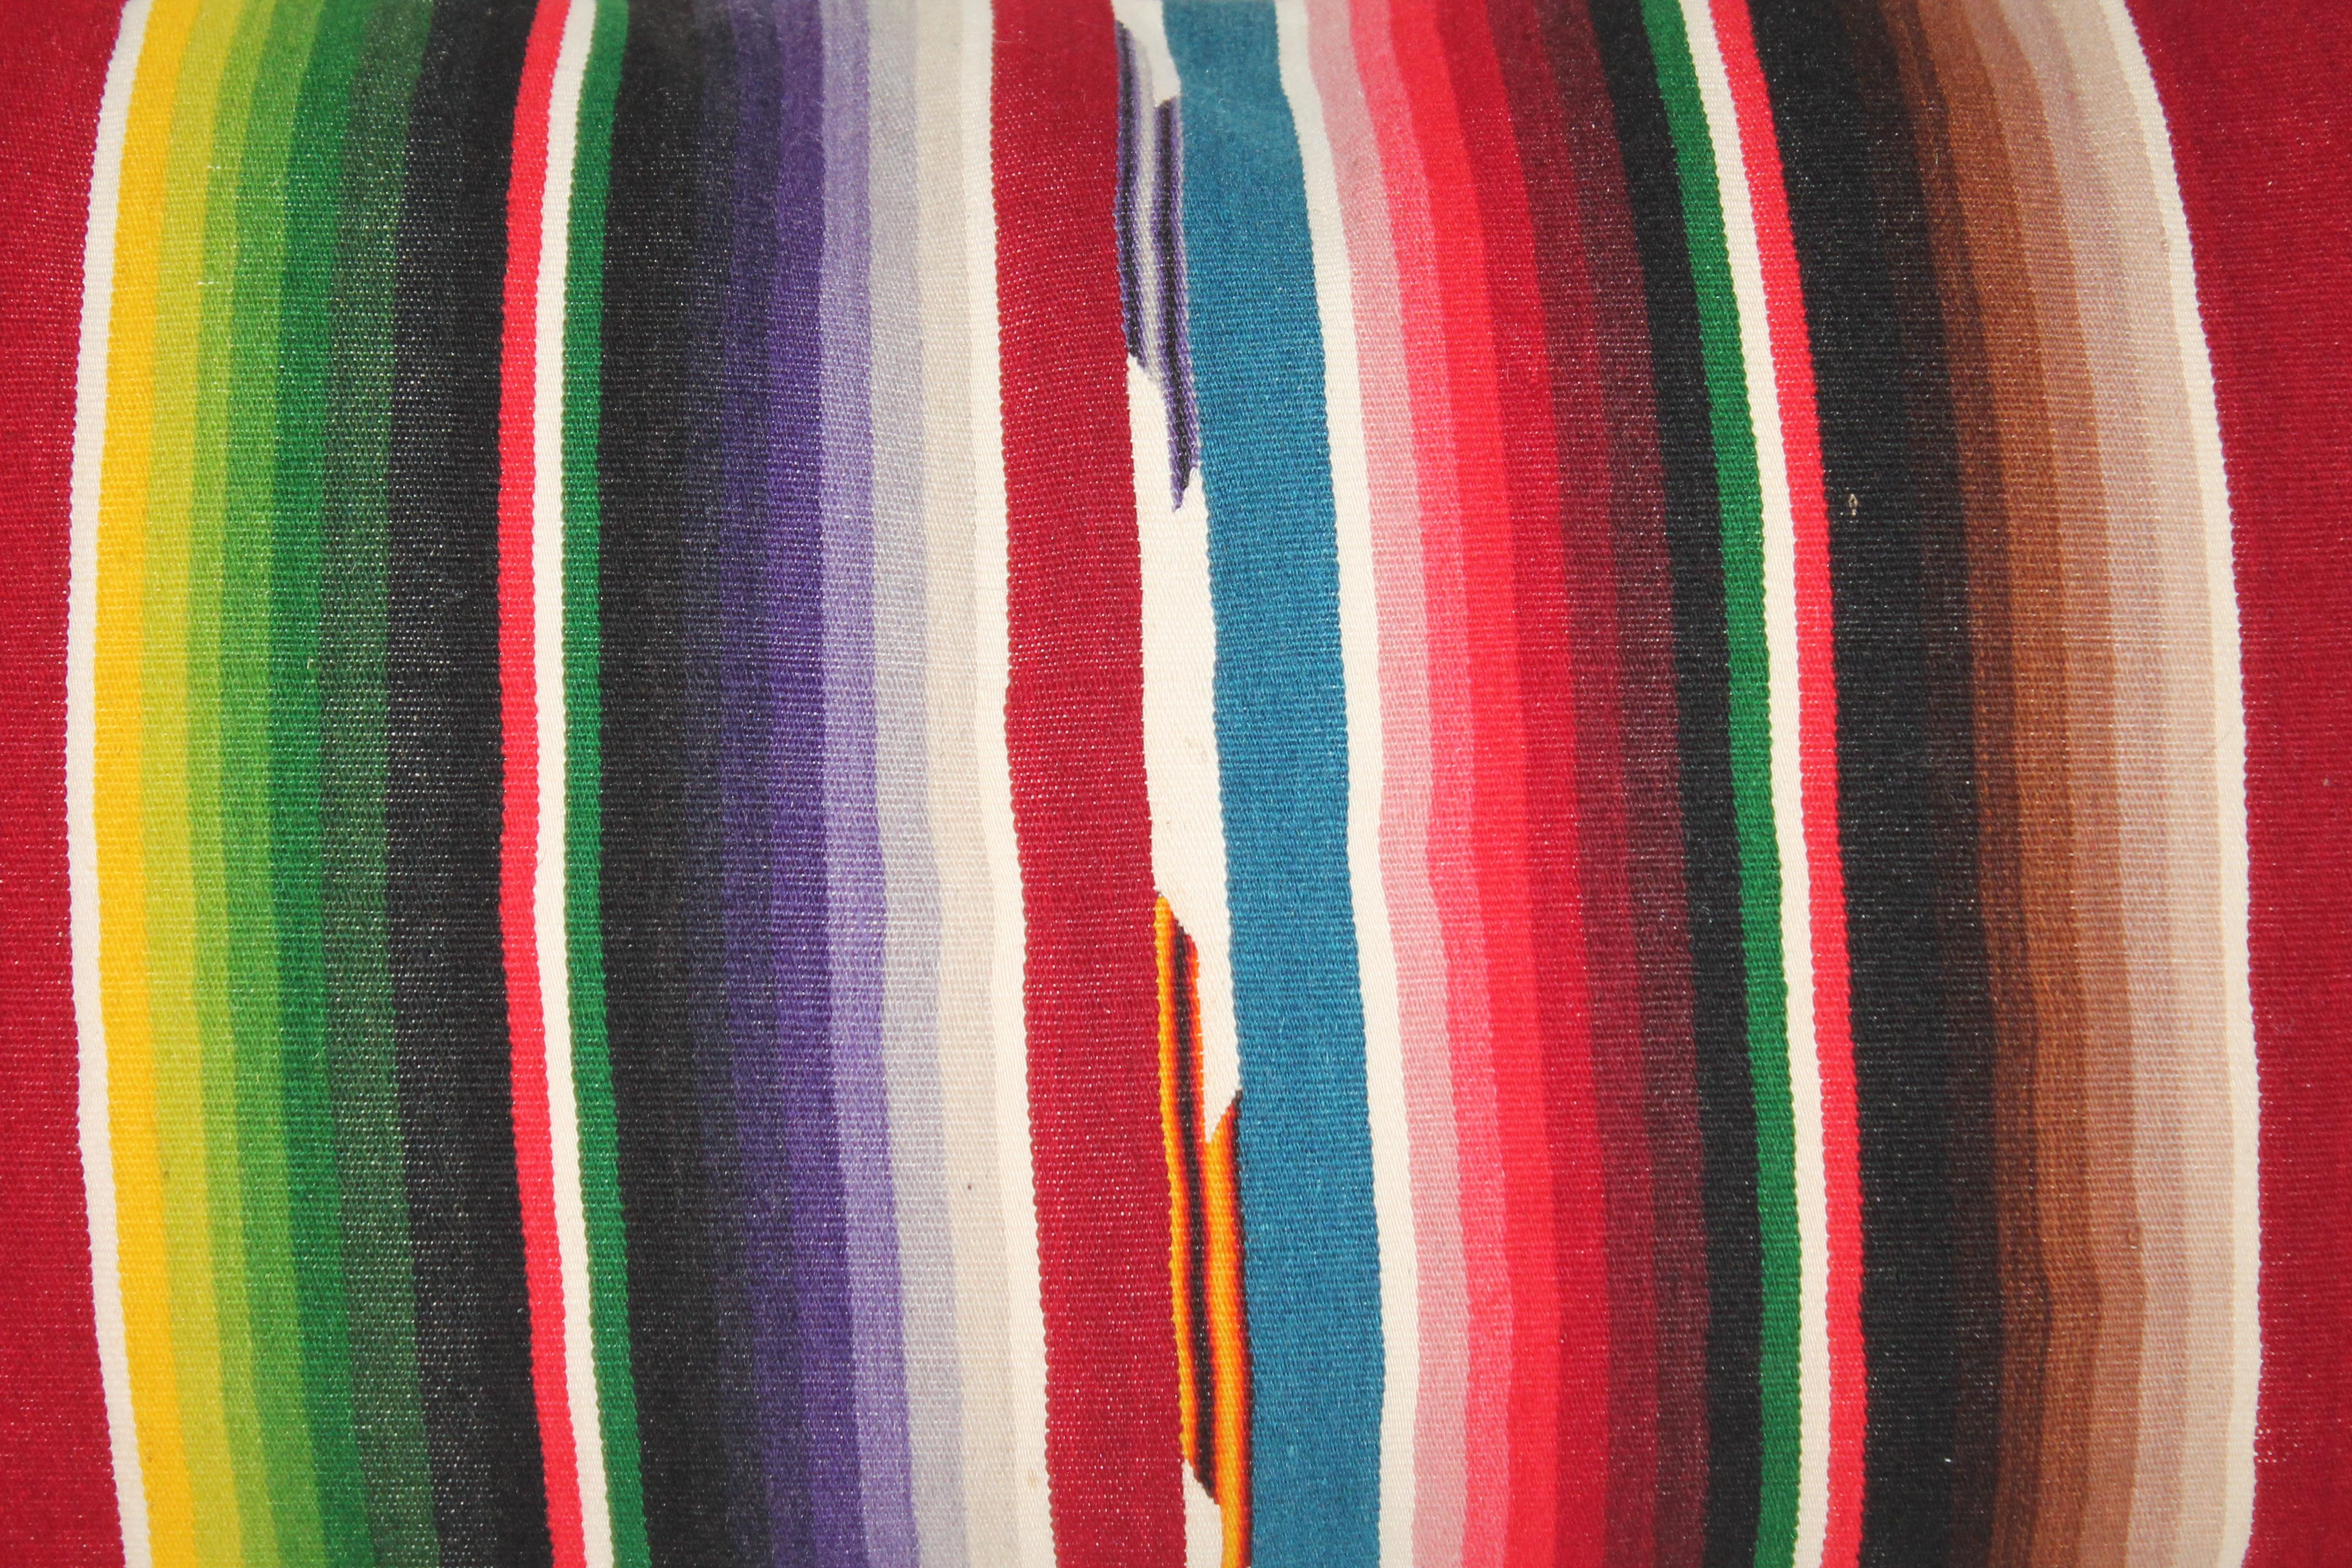 Amazing colors and fine condition serape weaving pillows. These colors are most unusual.